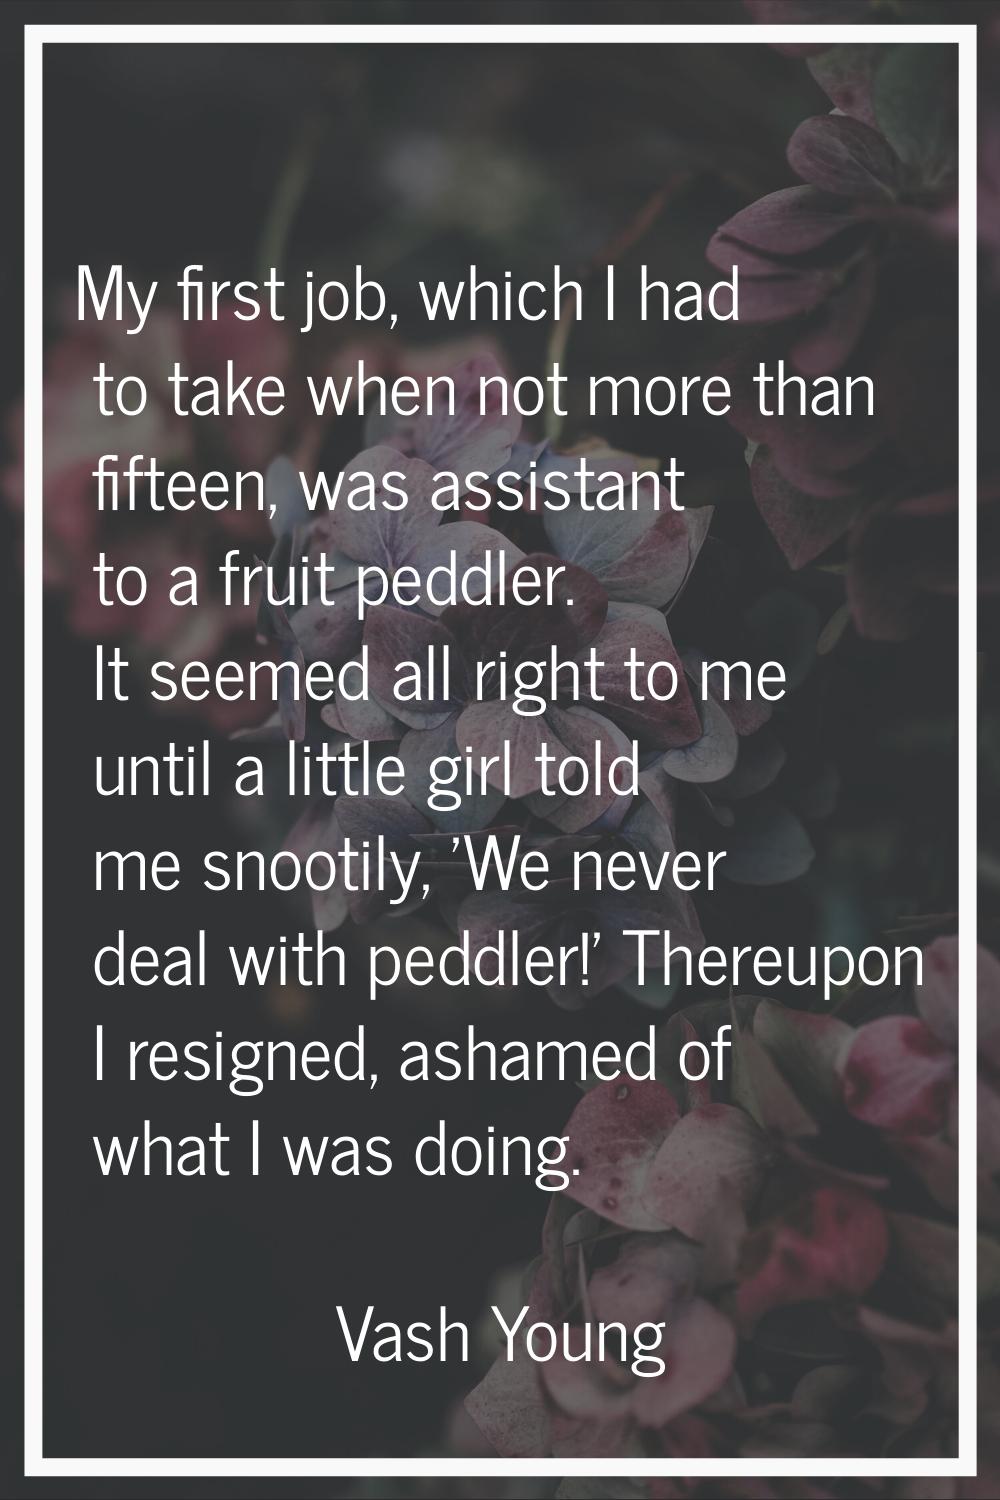 My first job, which I had to take when not more than fifteen, was assistant to a fruit peddler. It 